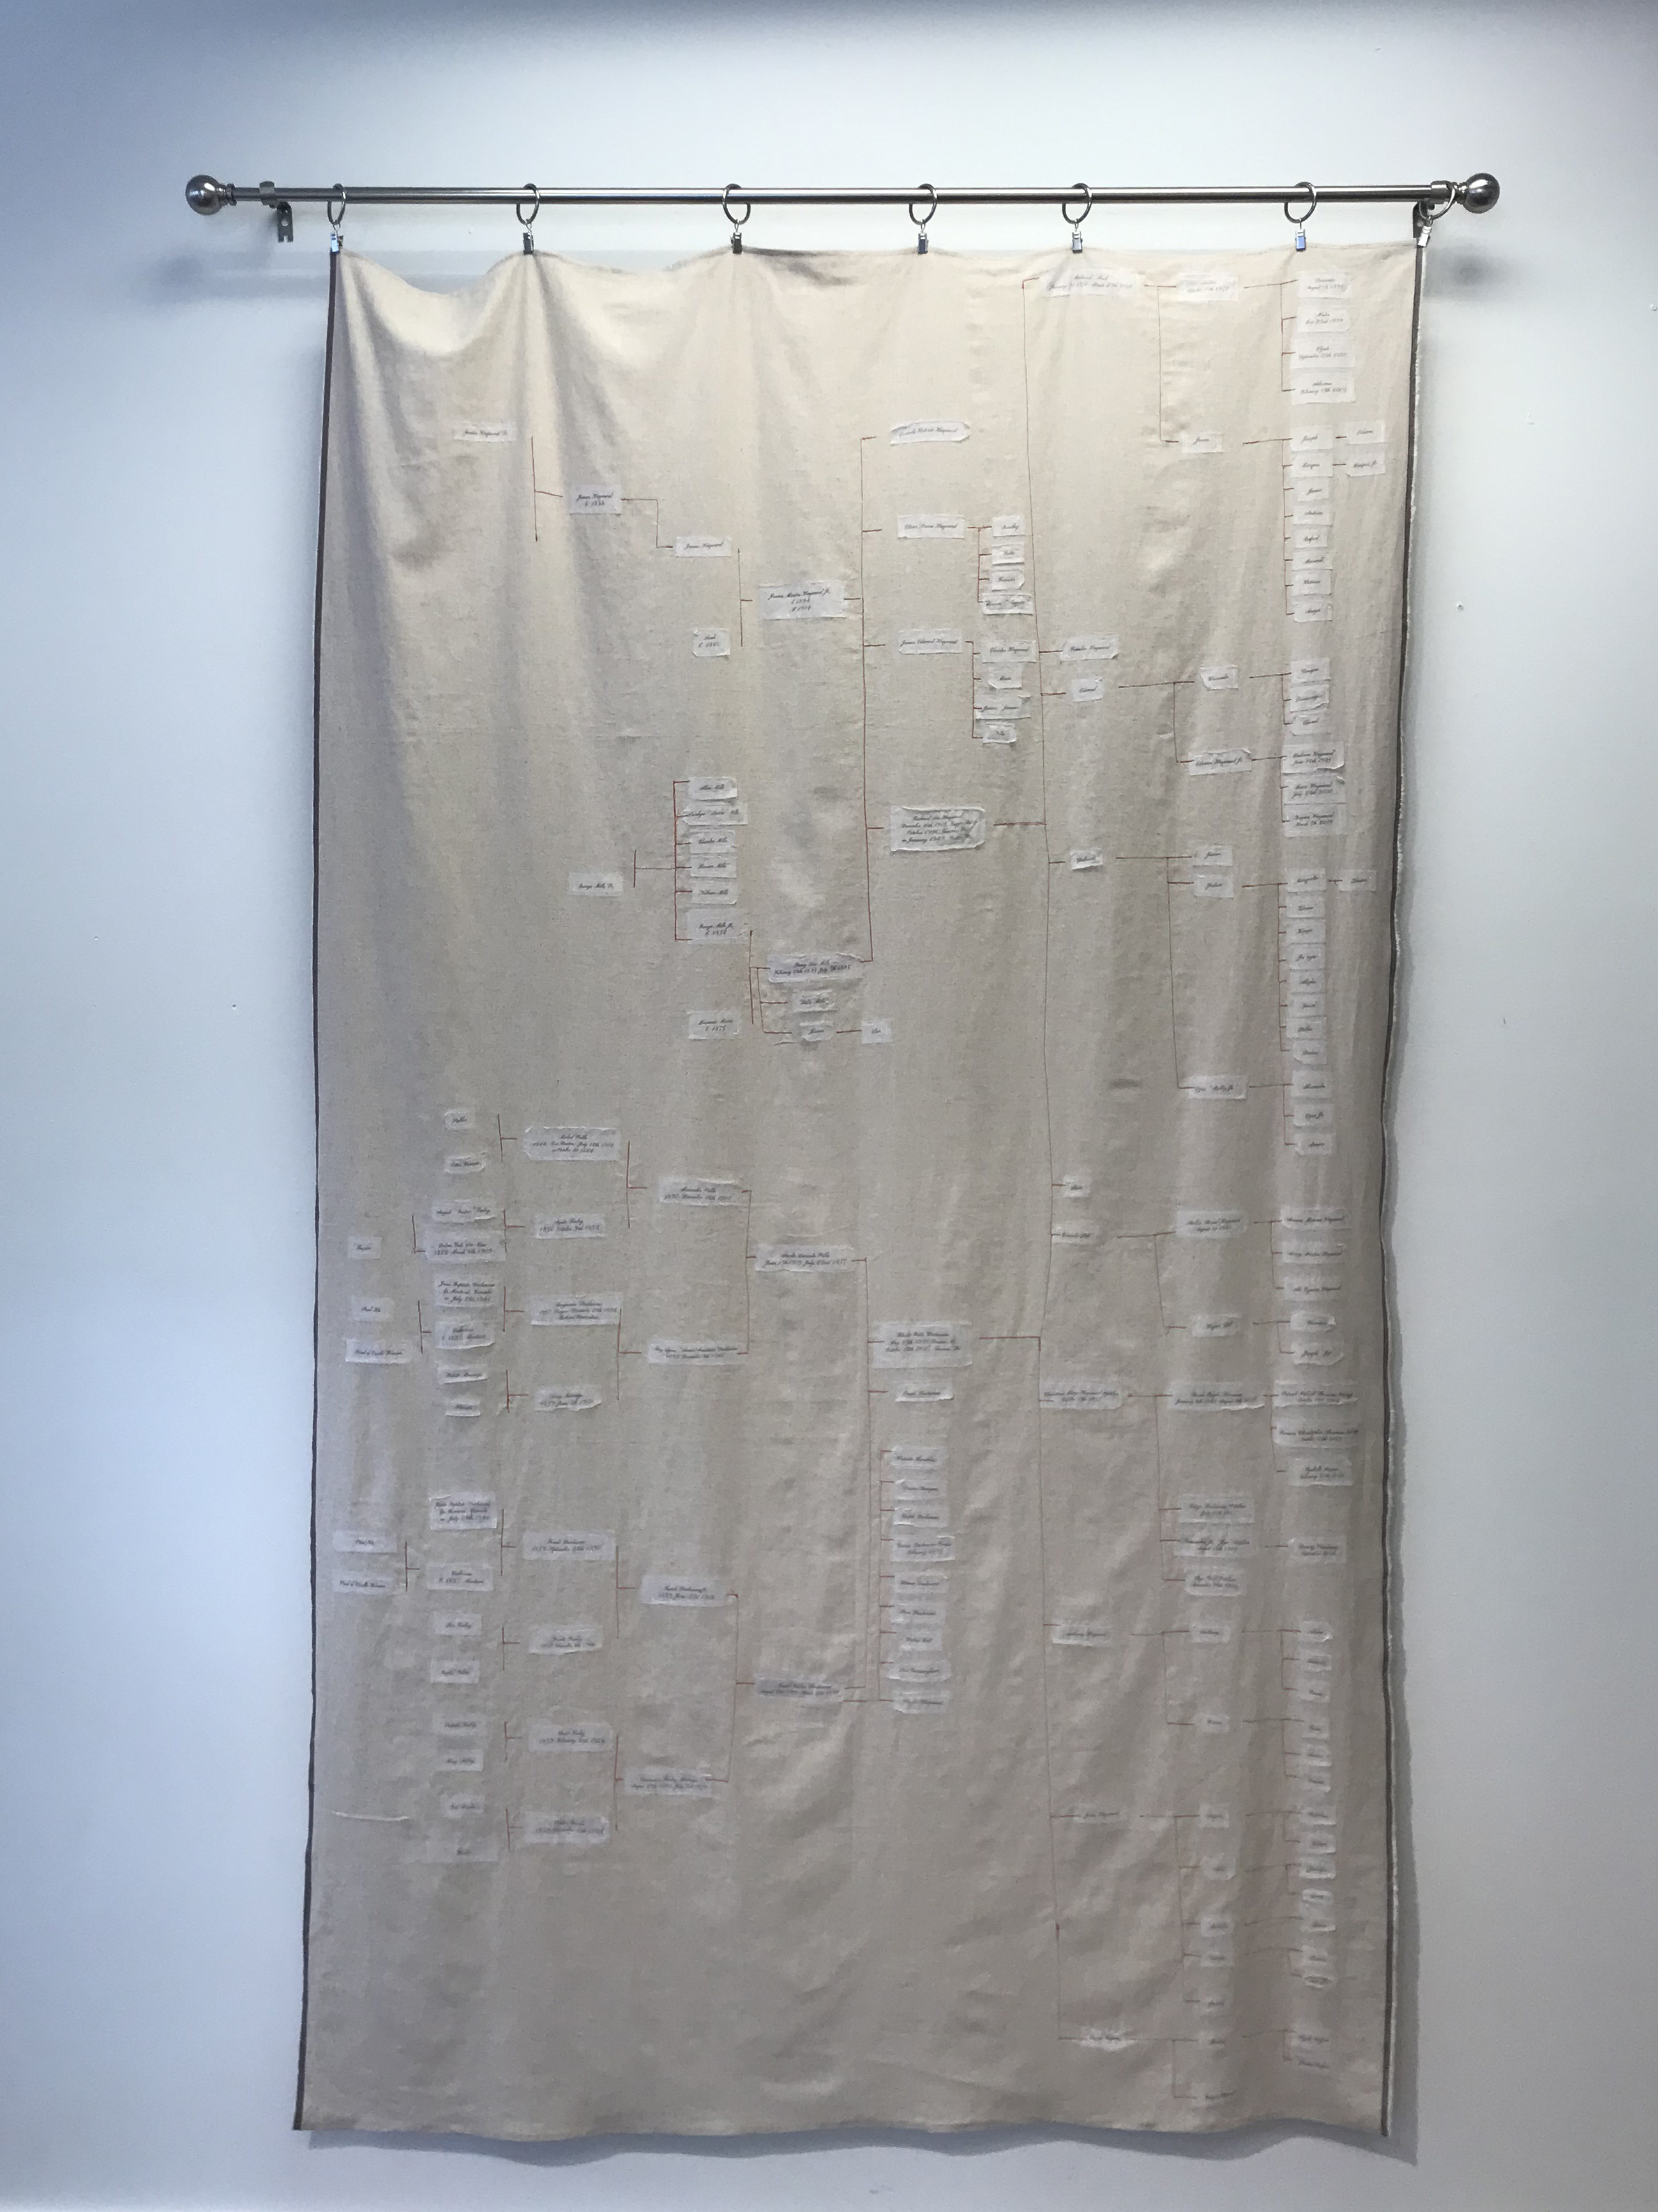 A branching diagram made with thin red lines of thread and white fabric labels on a large sheet of beige fabric.